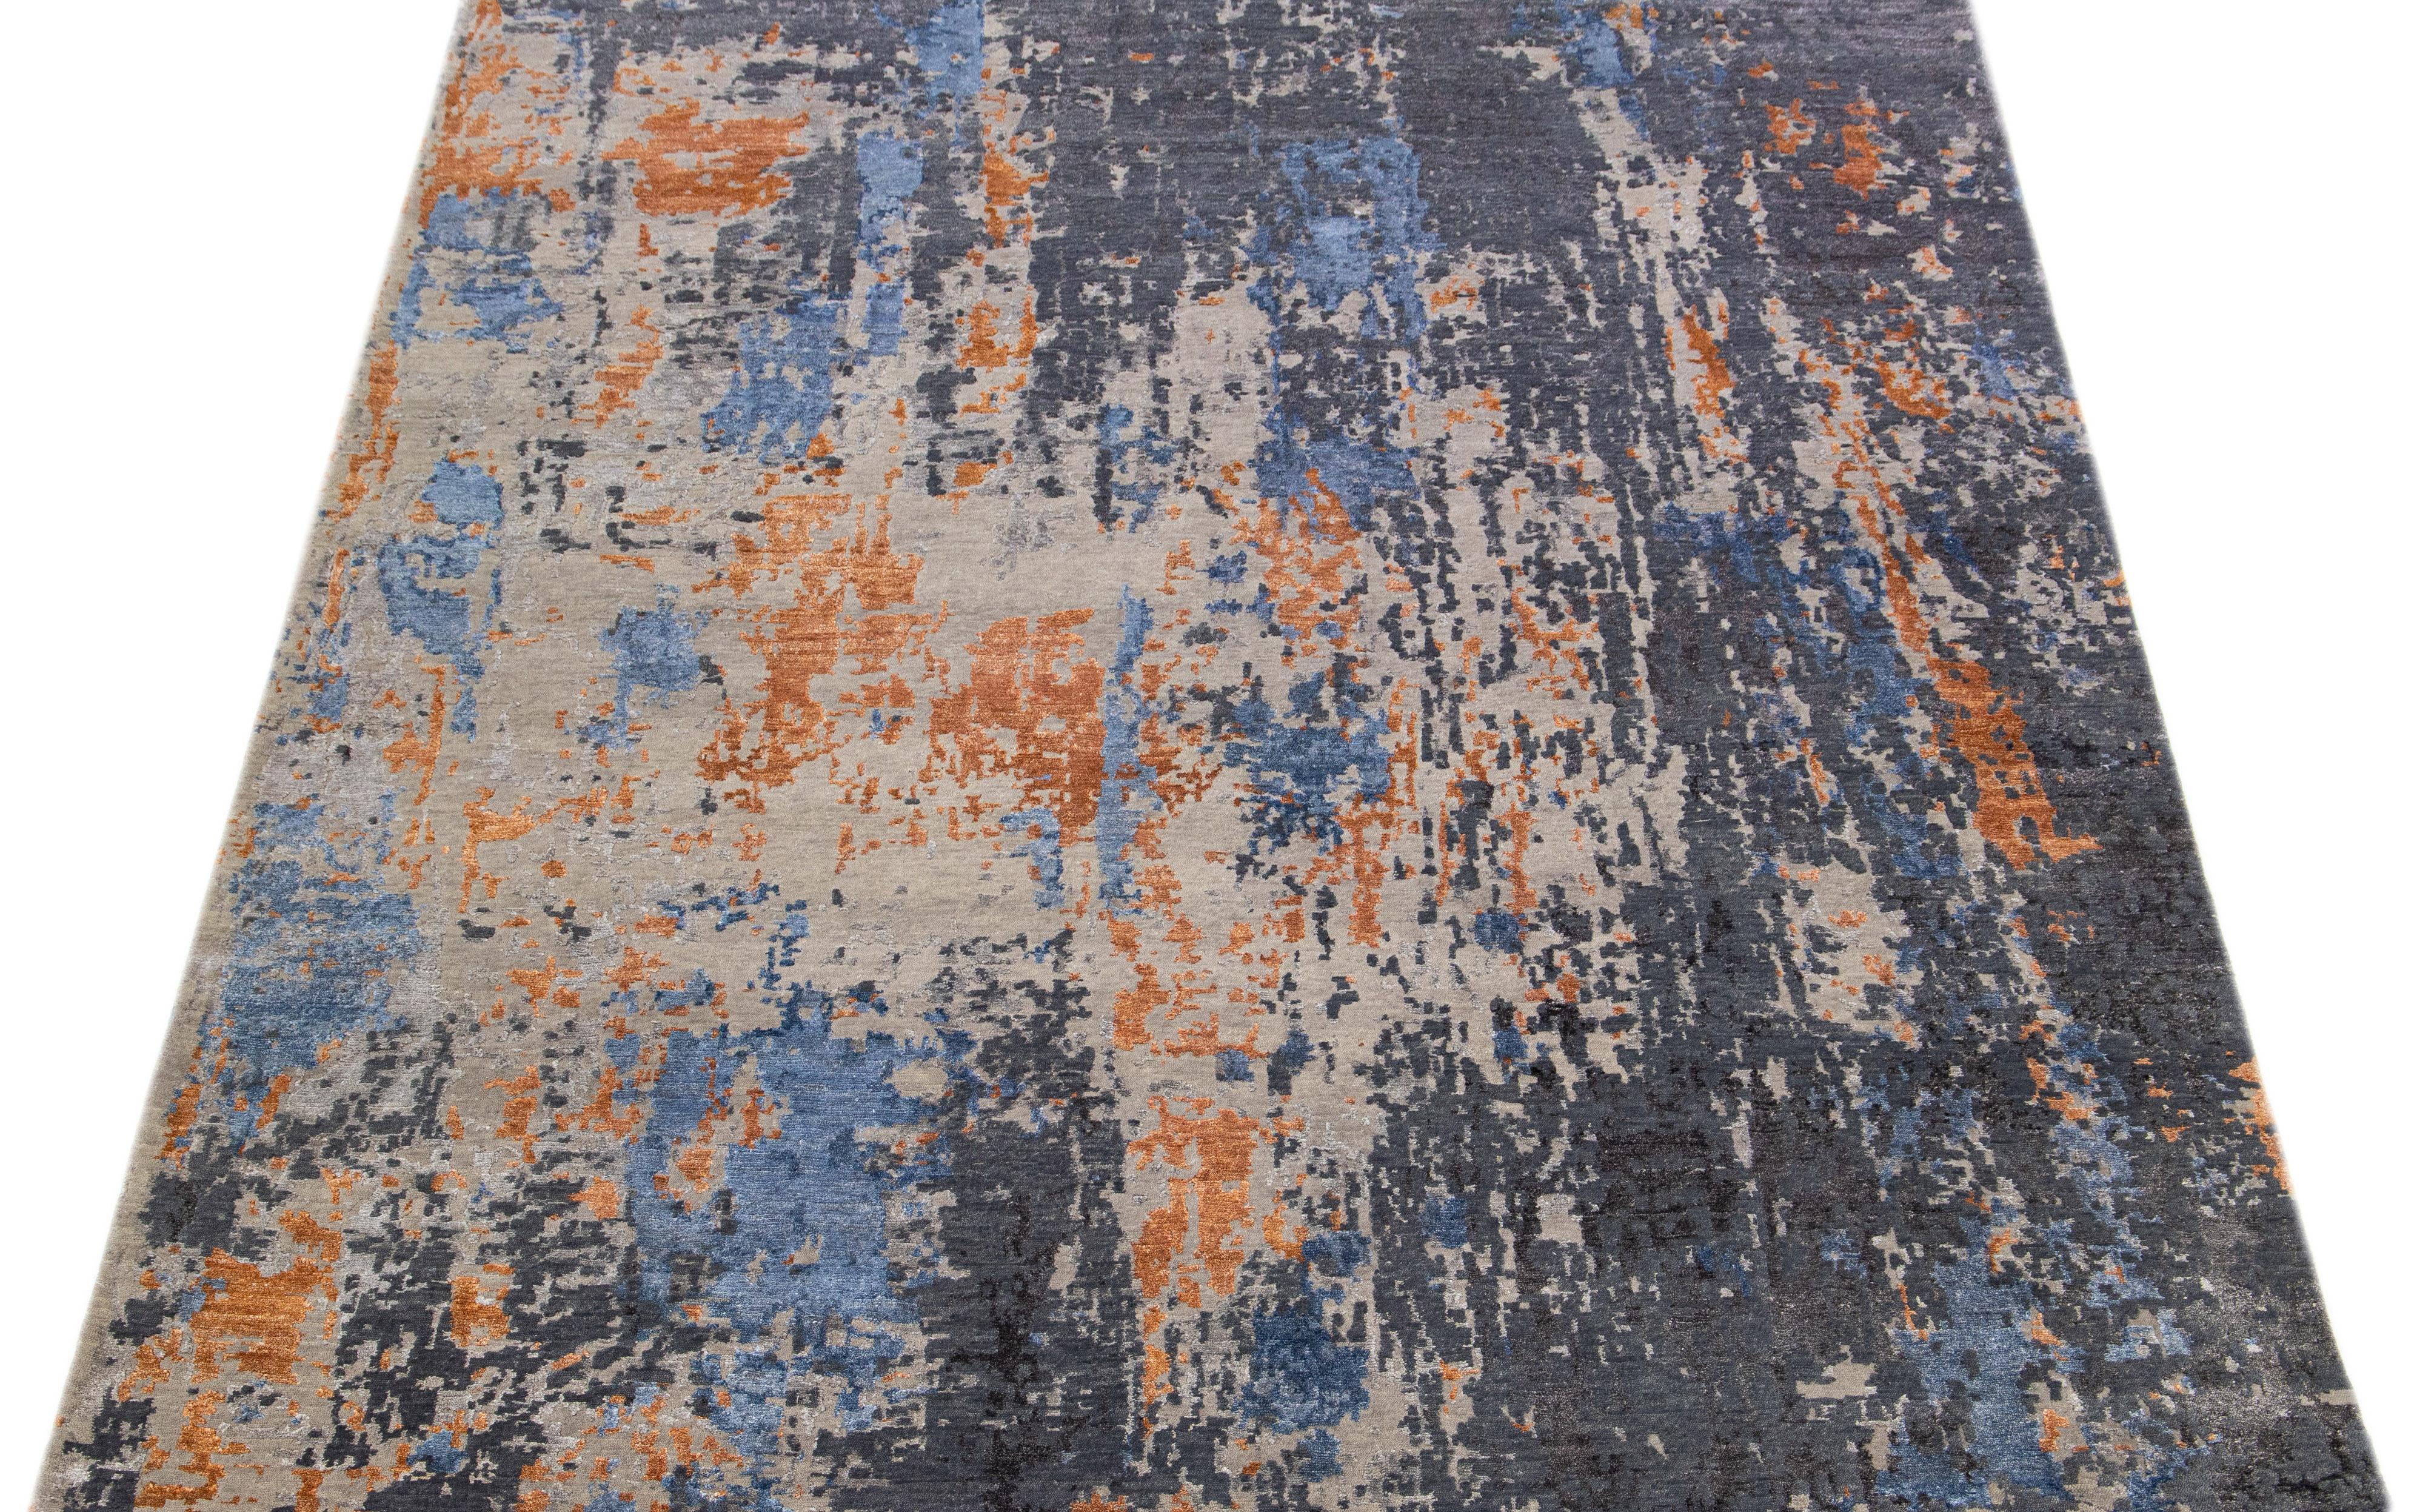 This Indian wool and silk blend rug features a tan field with an abstract pattern detailing gray and orange colors. Its composed materials provide robustness and longevity, while its ornamental design infuses any room with sophistication.

This